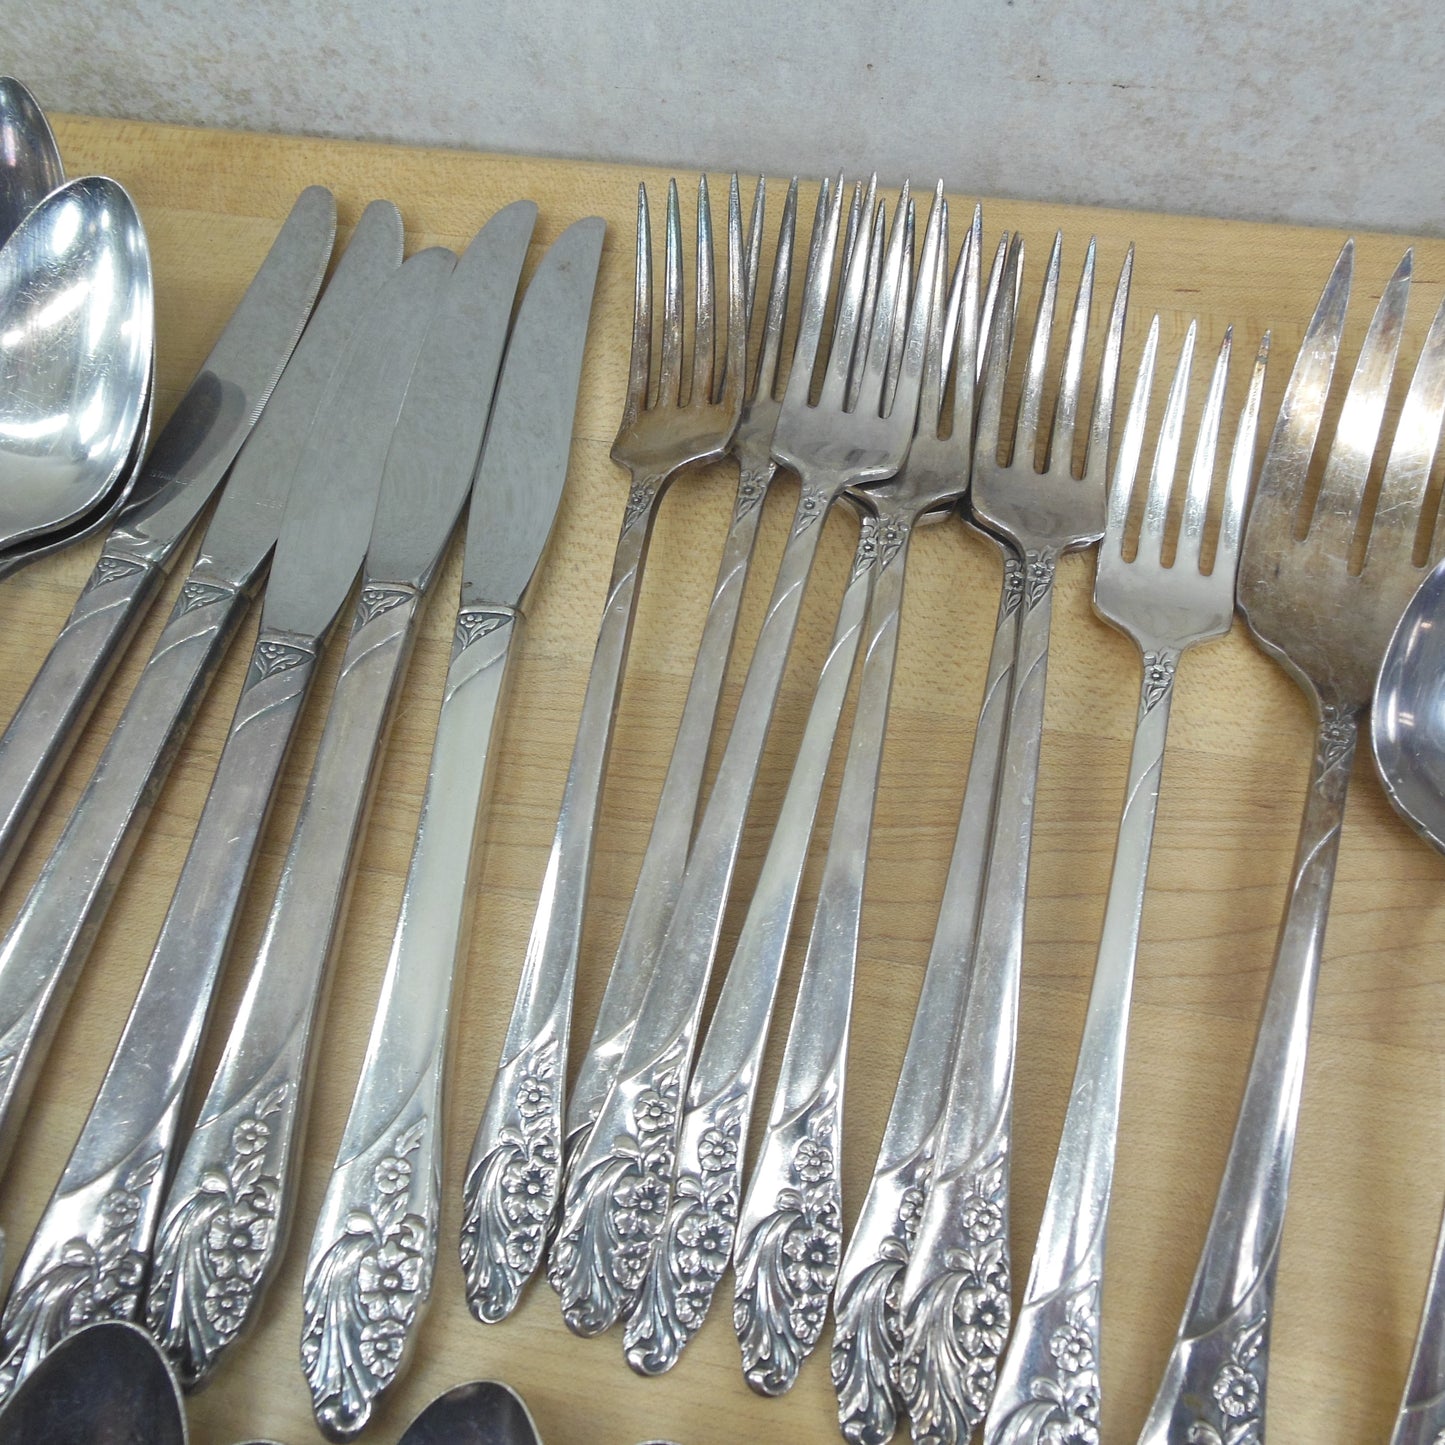 Oneida Community Evening Star Silverplate Flatware 39 Pieces Partial Set used